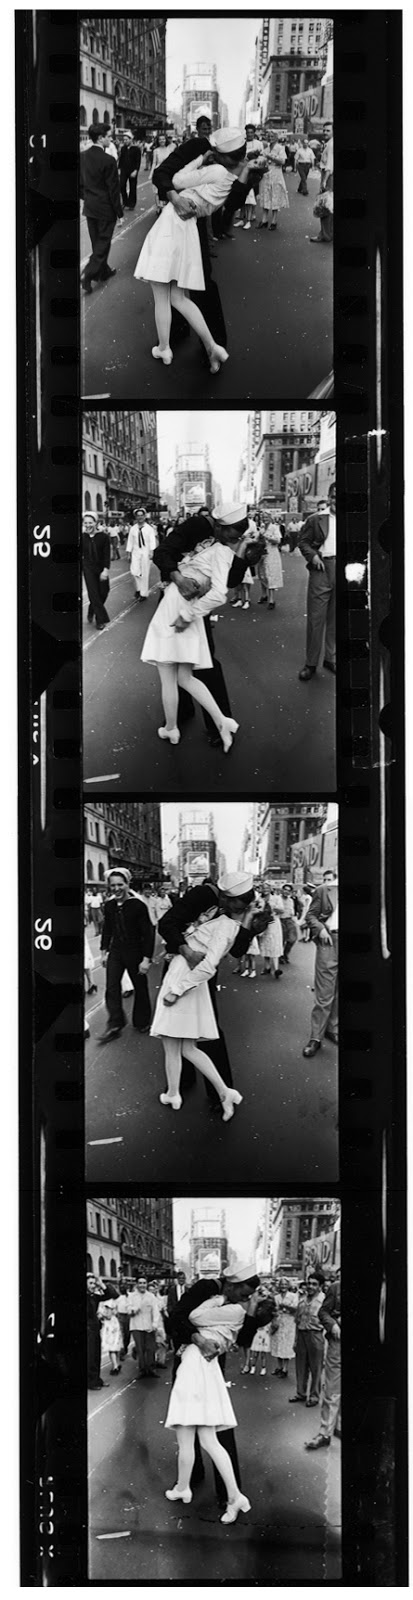 Image #1 for Navy veteran who claimed to be the man in the 1945 photo of a sailor kissing a nurse in Times Square amid World War II victory celebrations has died